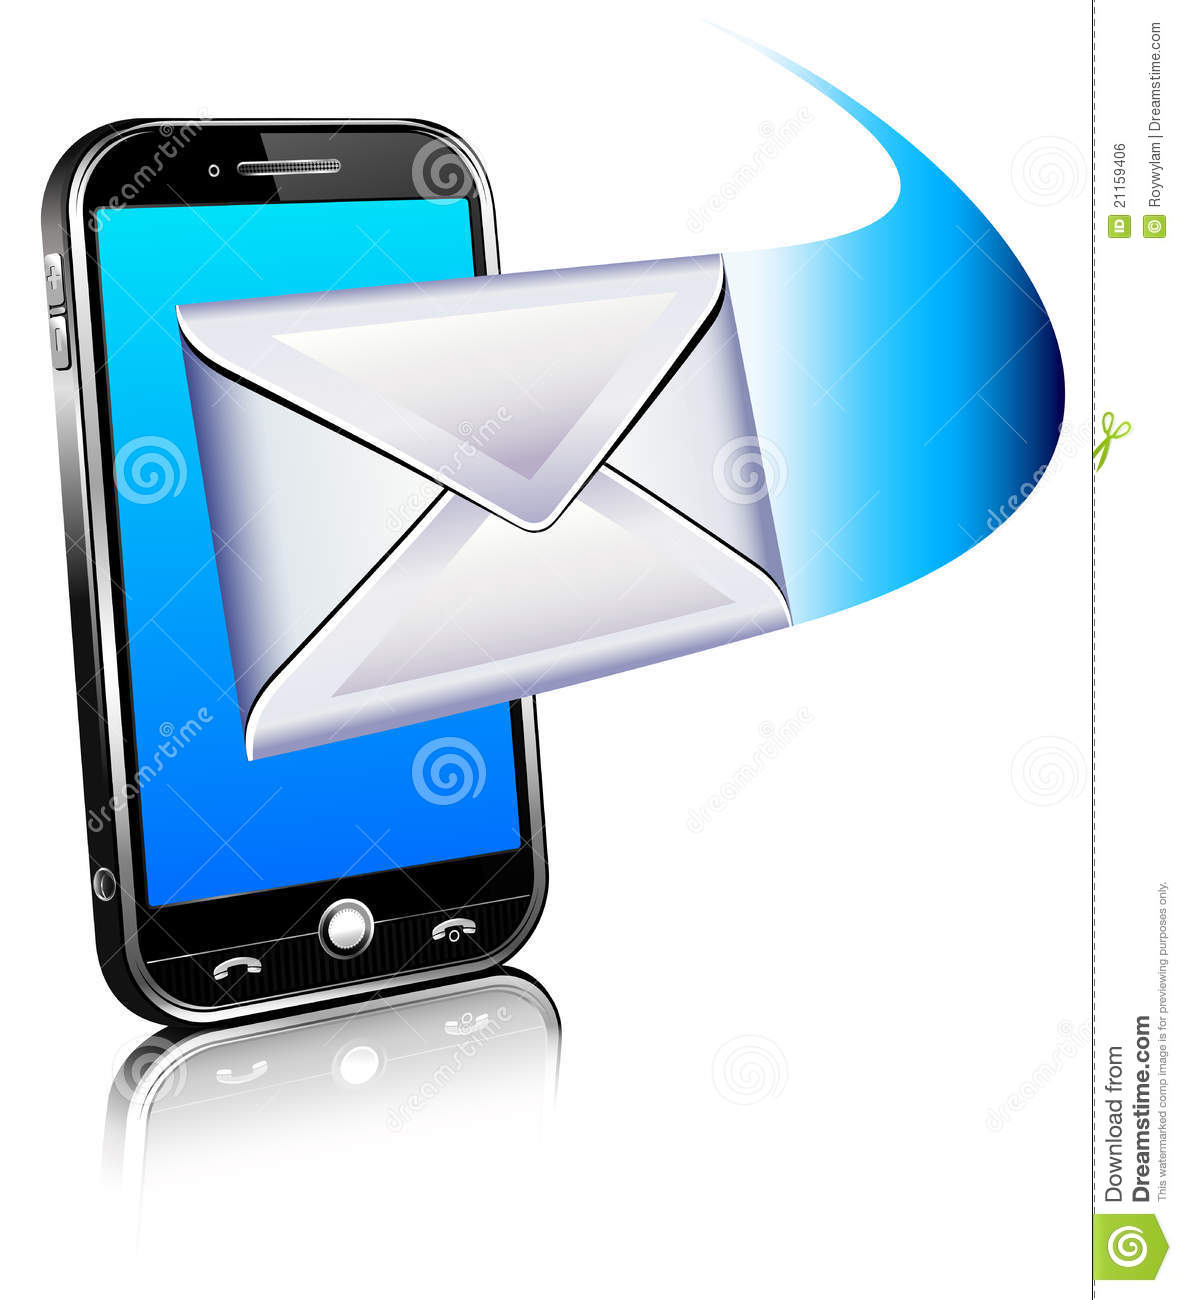 Mobile Phone and Email Icons